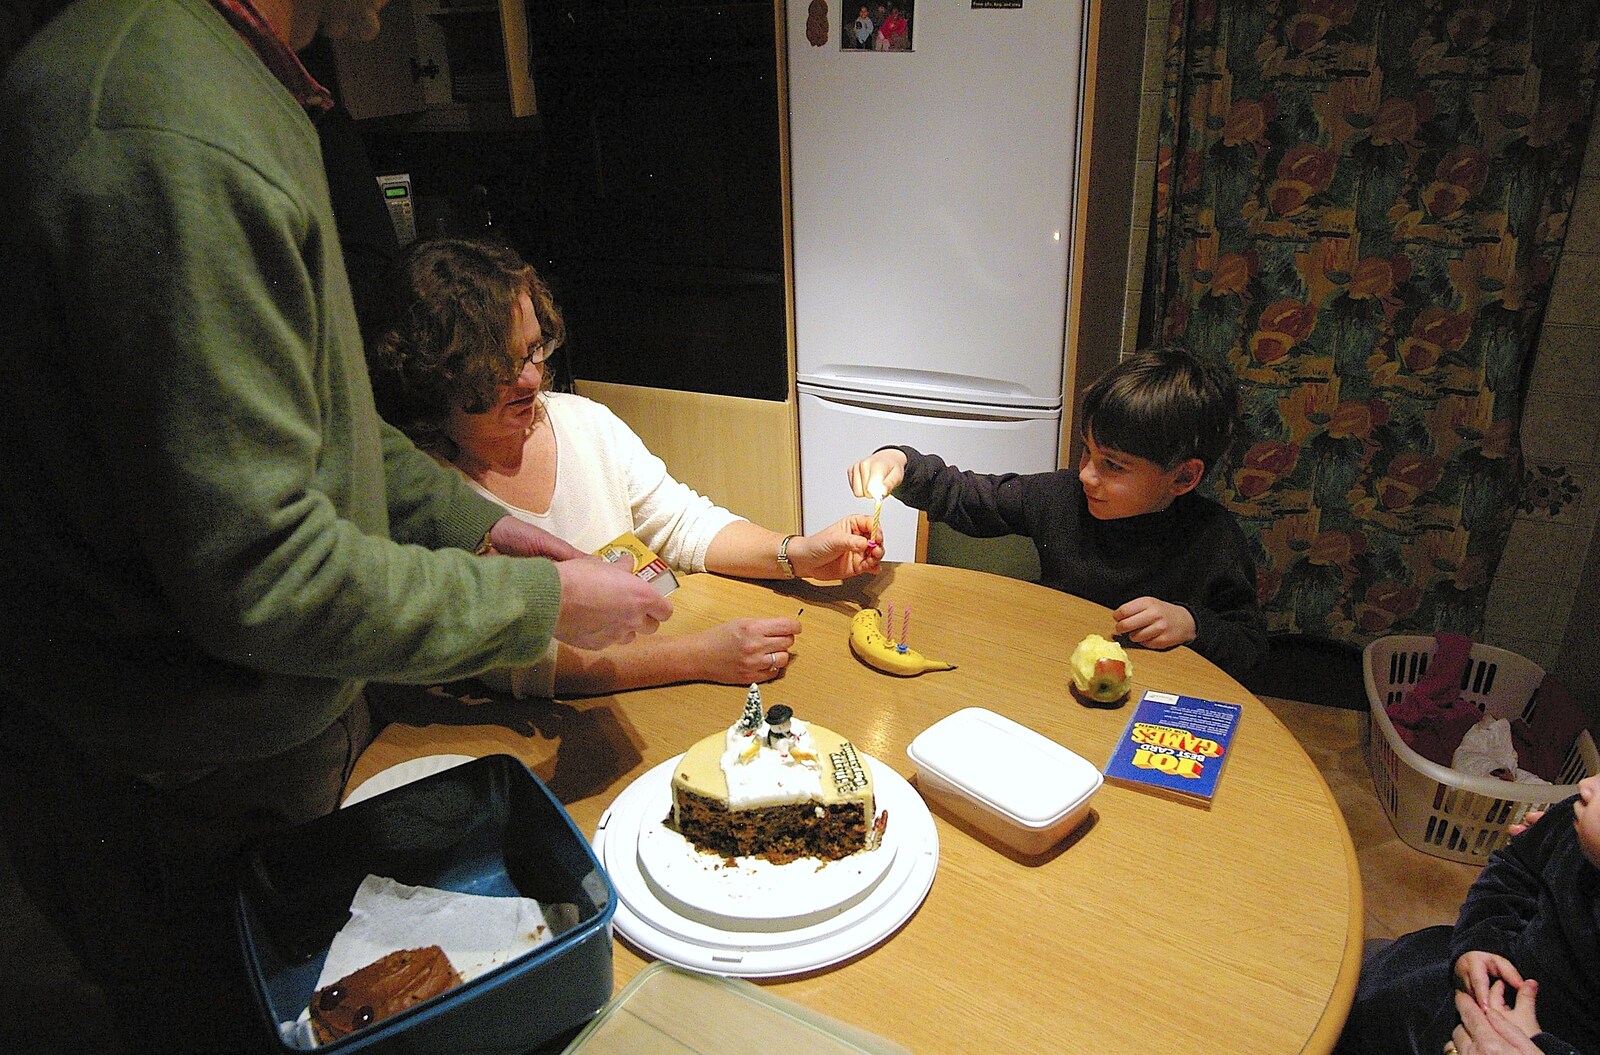 Lolly helps Kai make a banana menorah from Boxing Day Miscellany, Hordle and Barton-on-Sea, Hampshire - 26th December 2005